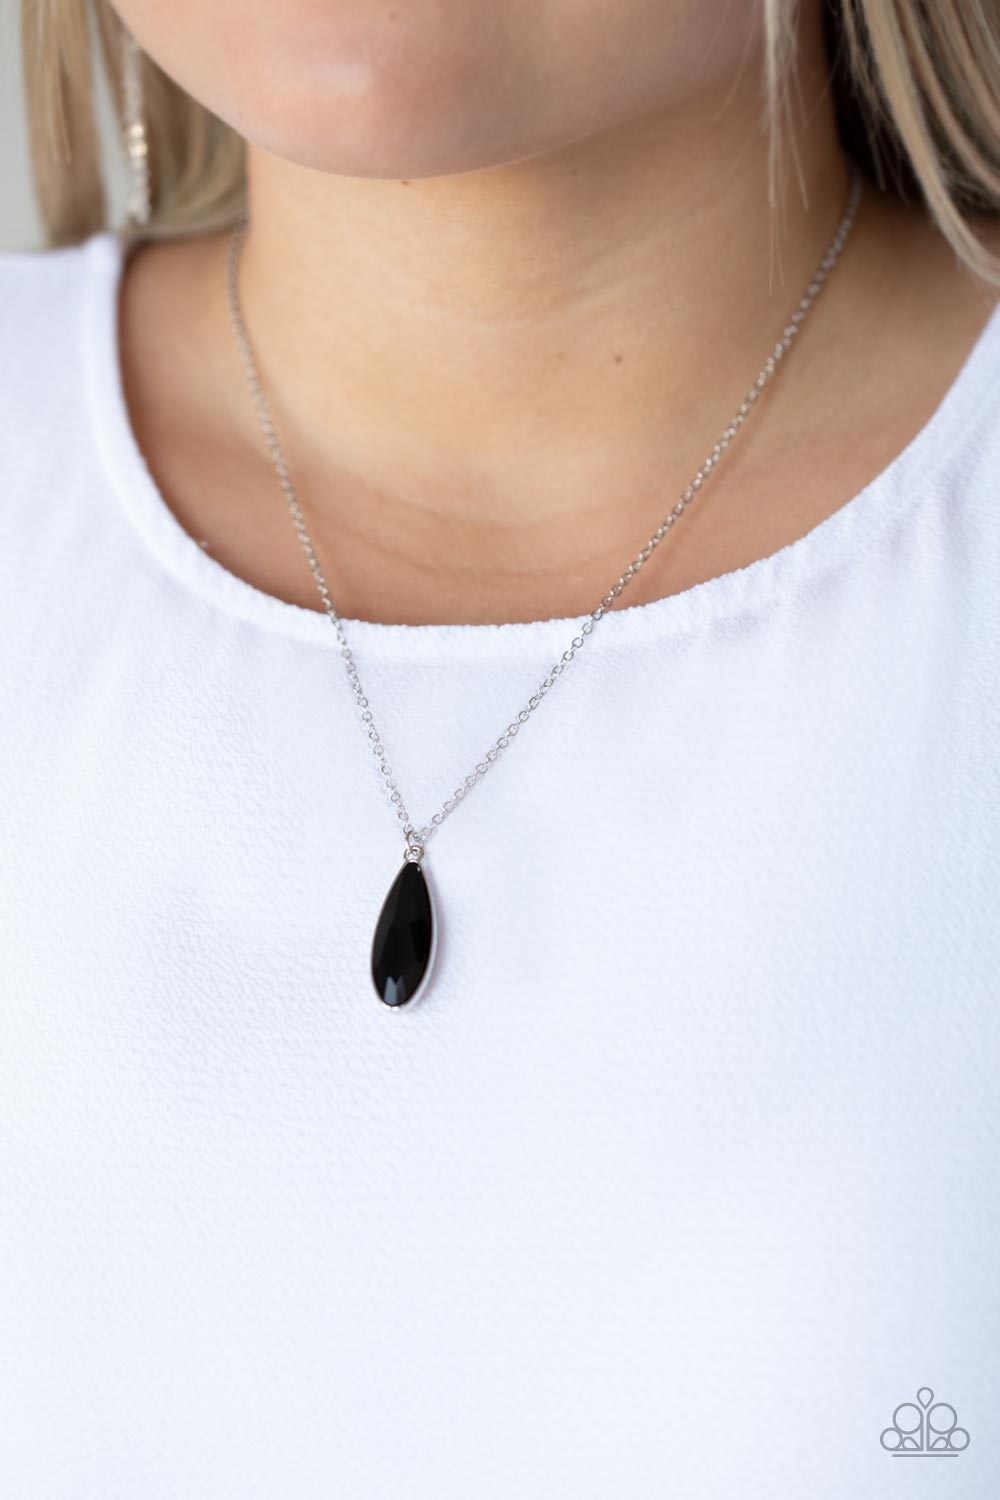 Prismatically Polished Black Necklace - Paparazzi Accessories-on model - CarasShop.com - $5 Jewelry by Cara Jewels